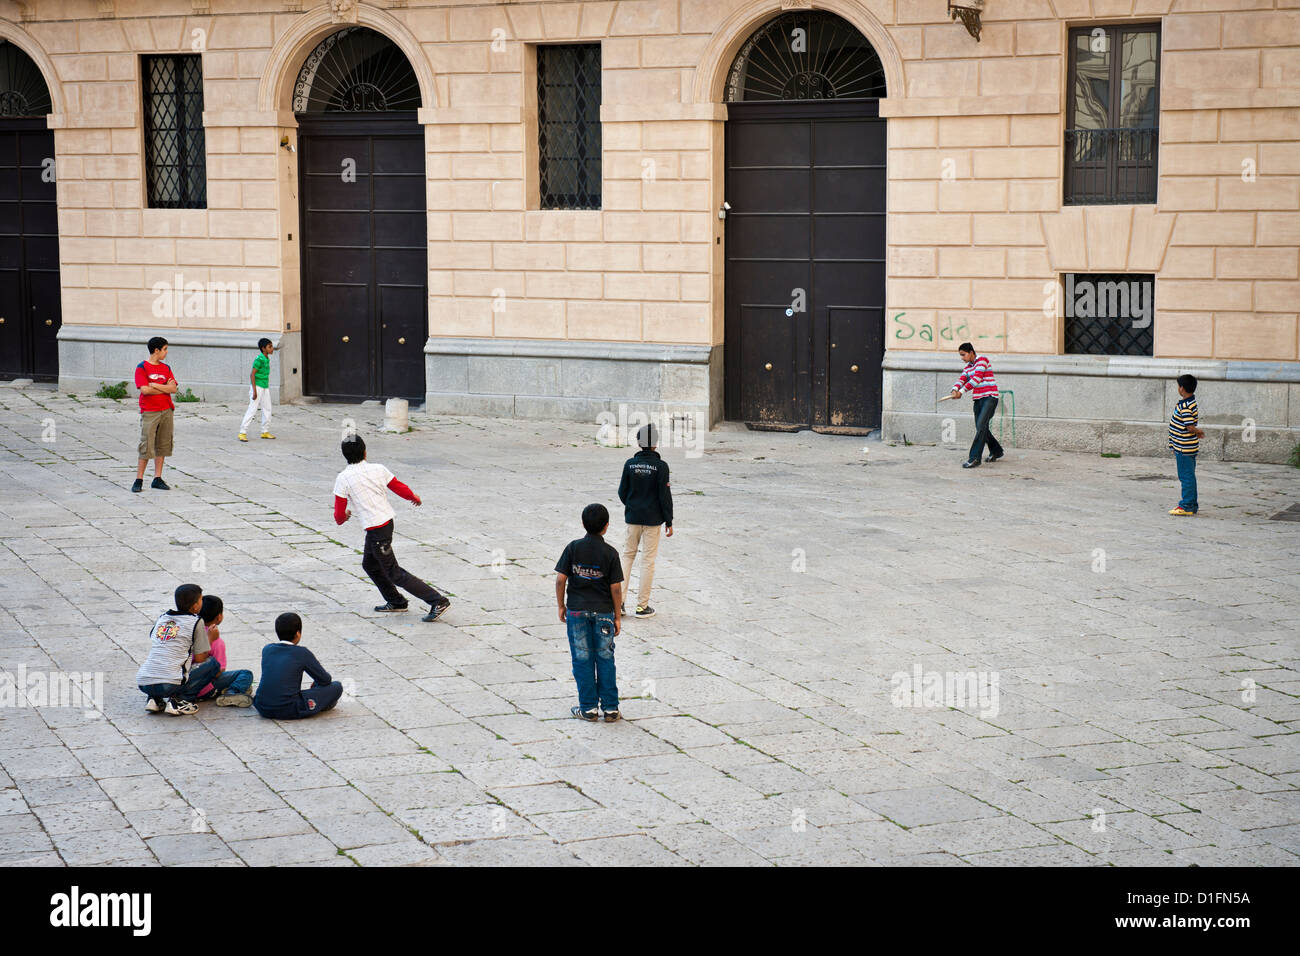 Bangladeshi migrant boys play cricket in a Square in old Palermo, Italy Stock Photo